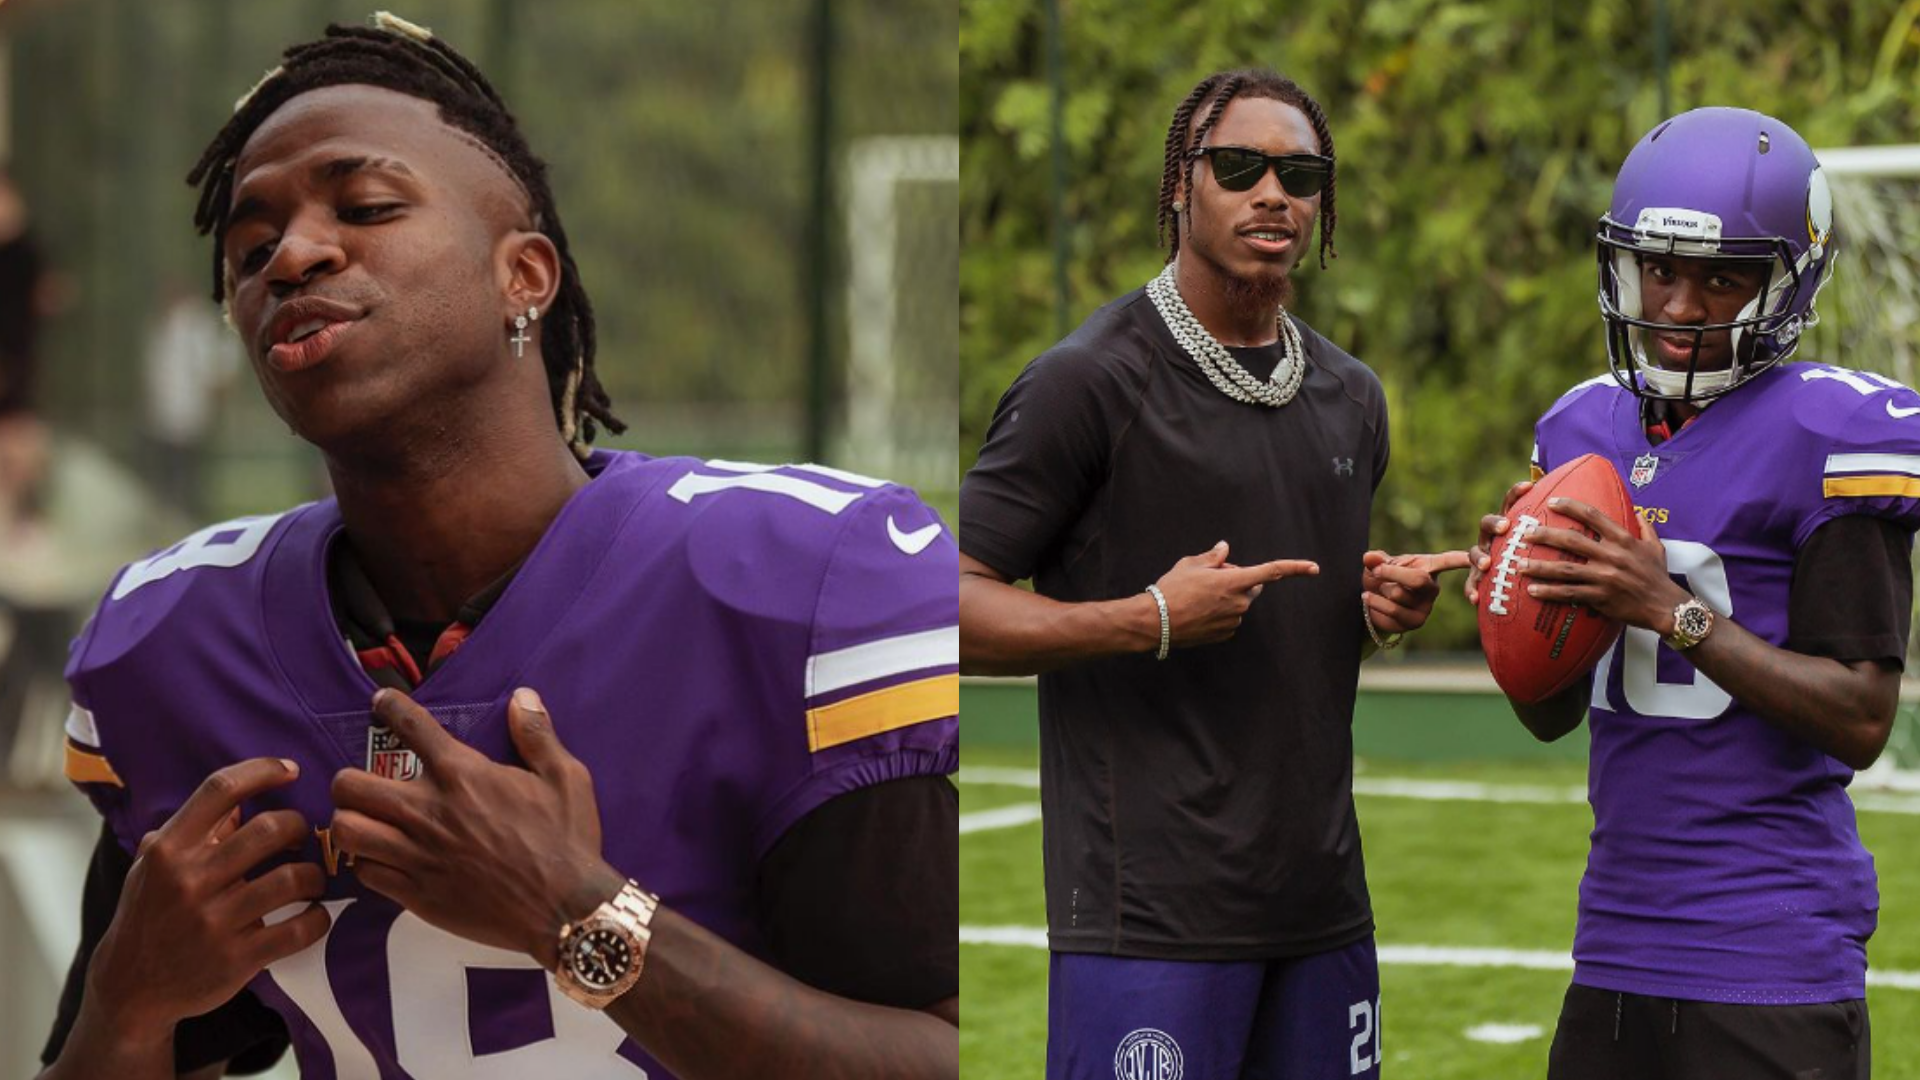 Vinicius Junior x Justin Jefferson! Real Madrid star tries out American football with Minnesota Vikings wide receiver in Rio de Janeiro | Goal.com